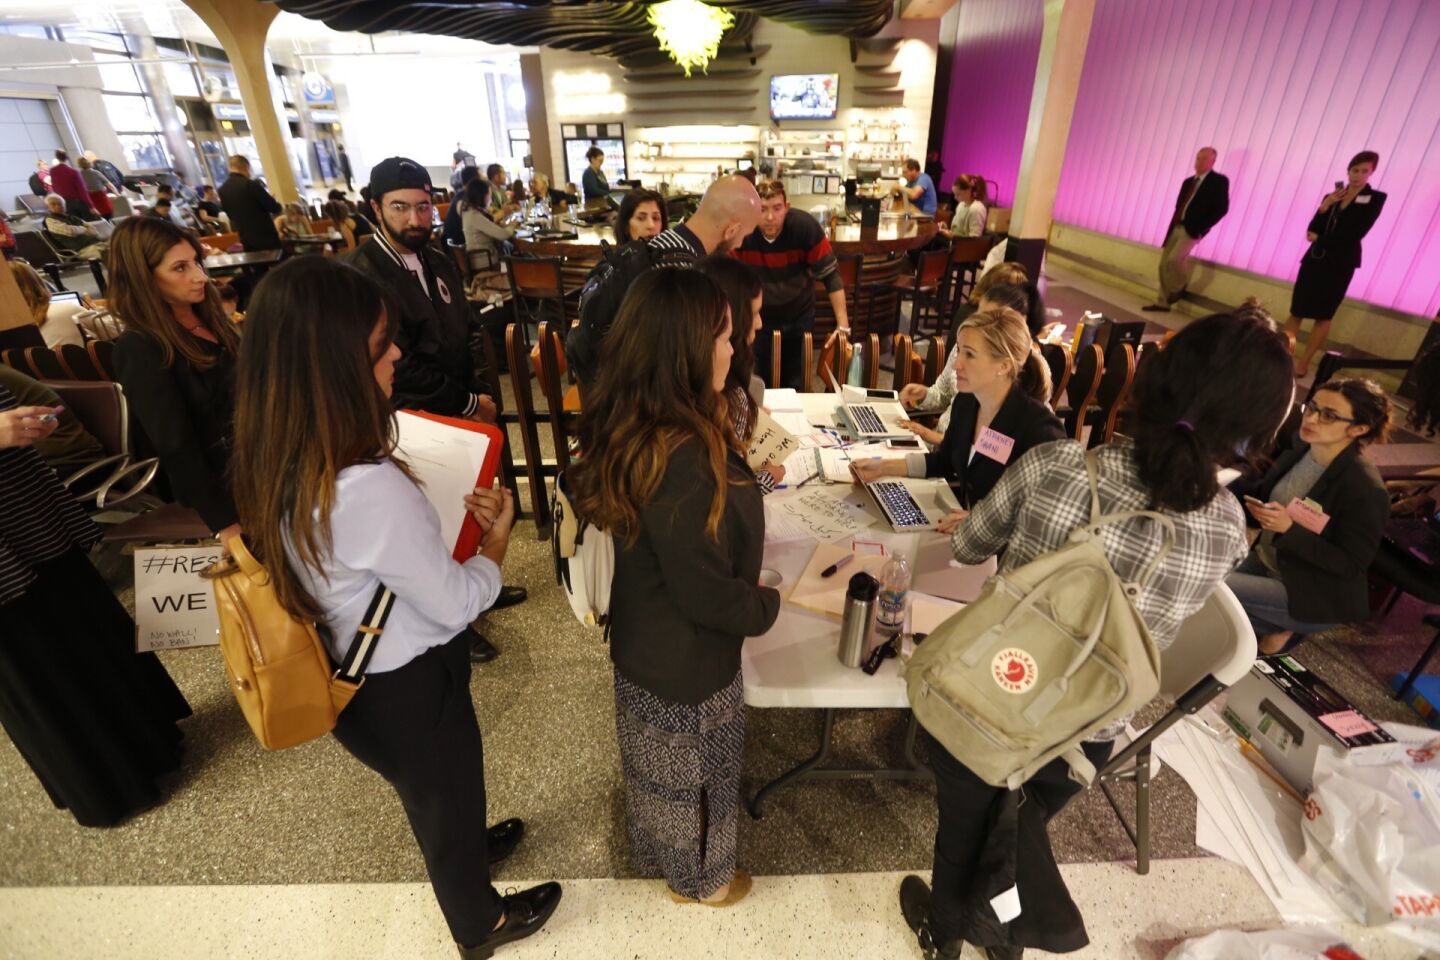 Attorney's crowd a small table at the Tom Bradley International Terminal at LAX on Monday to assist travelers who require help due to President Trump’s travel restrictions.